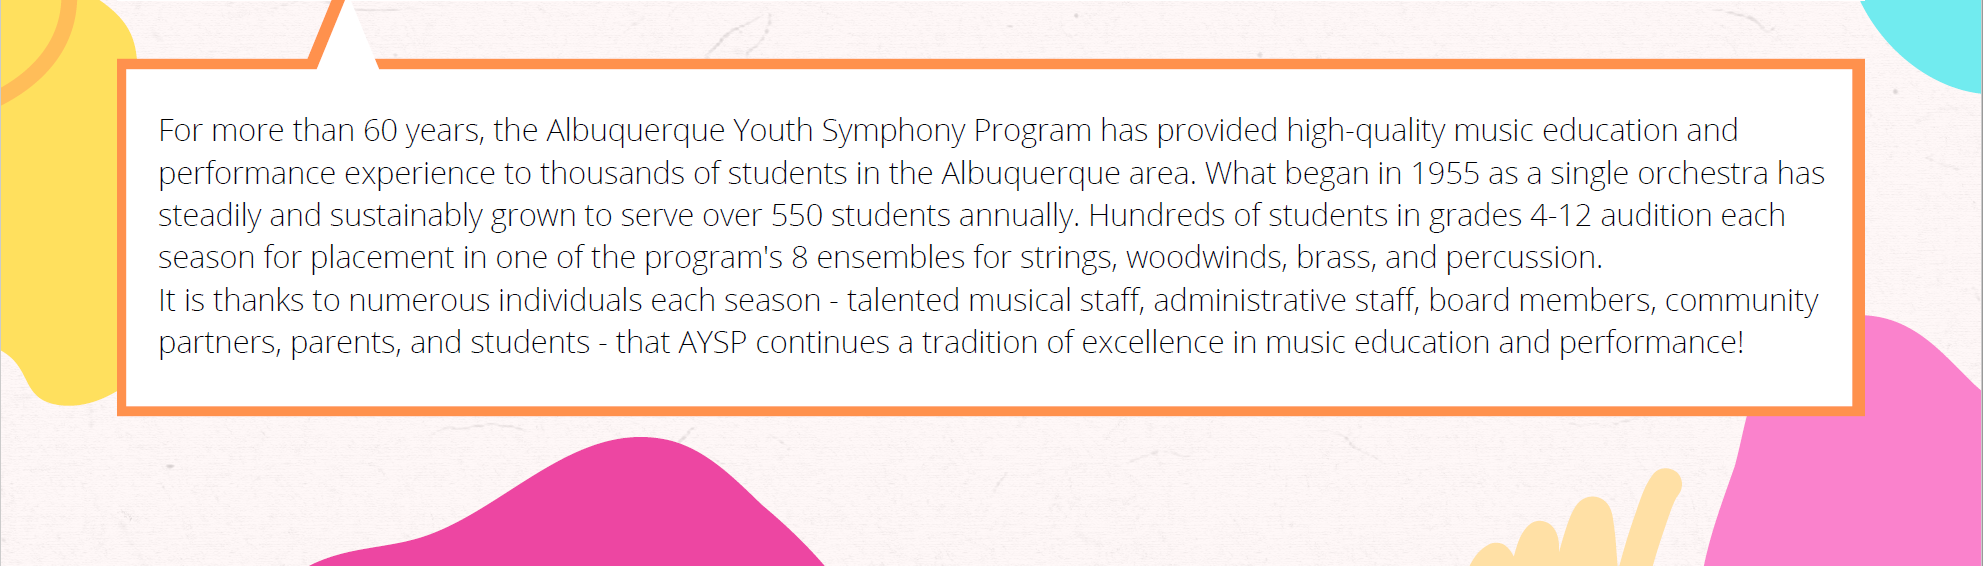 For more than 60 years, the Albuquerque Youth Symphony Program has provided high-quality music education and performance experience to thousands of students in the Albuquerque area. What began in 1955 as a single orchestra has steadily and sustainably grown to serve over 550 students annually. Hundreds of students in grades 4-12 audition each season for placement in one of the program's 8 ensembles for strings, woodwinds, brass, and percussion. It is thanks to numerous individuals each season - talented musical staff, administrative staff, board members, community partners, parents, and students - that AYSP continues a tradition of excellence in music education and performance!